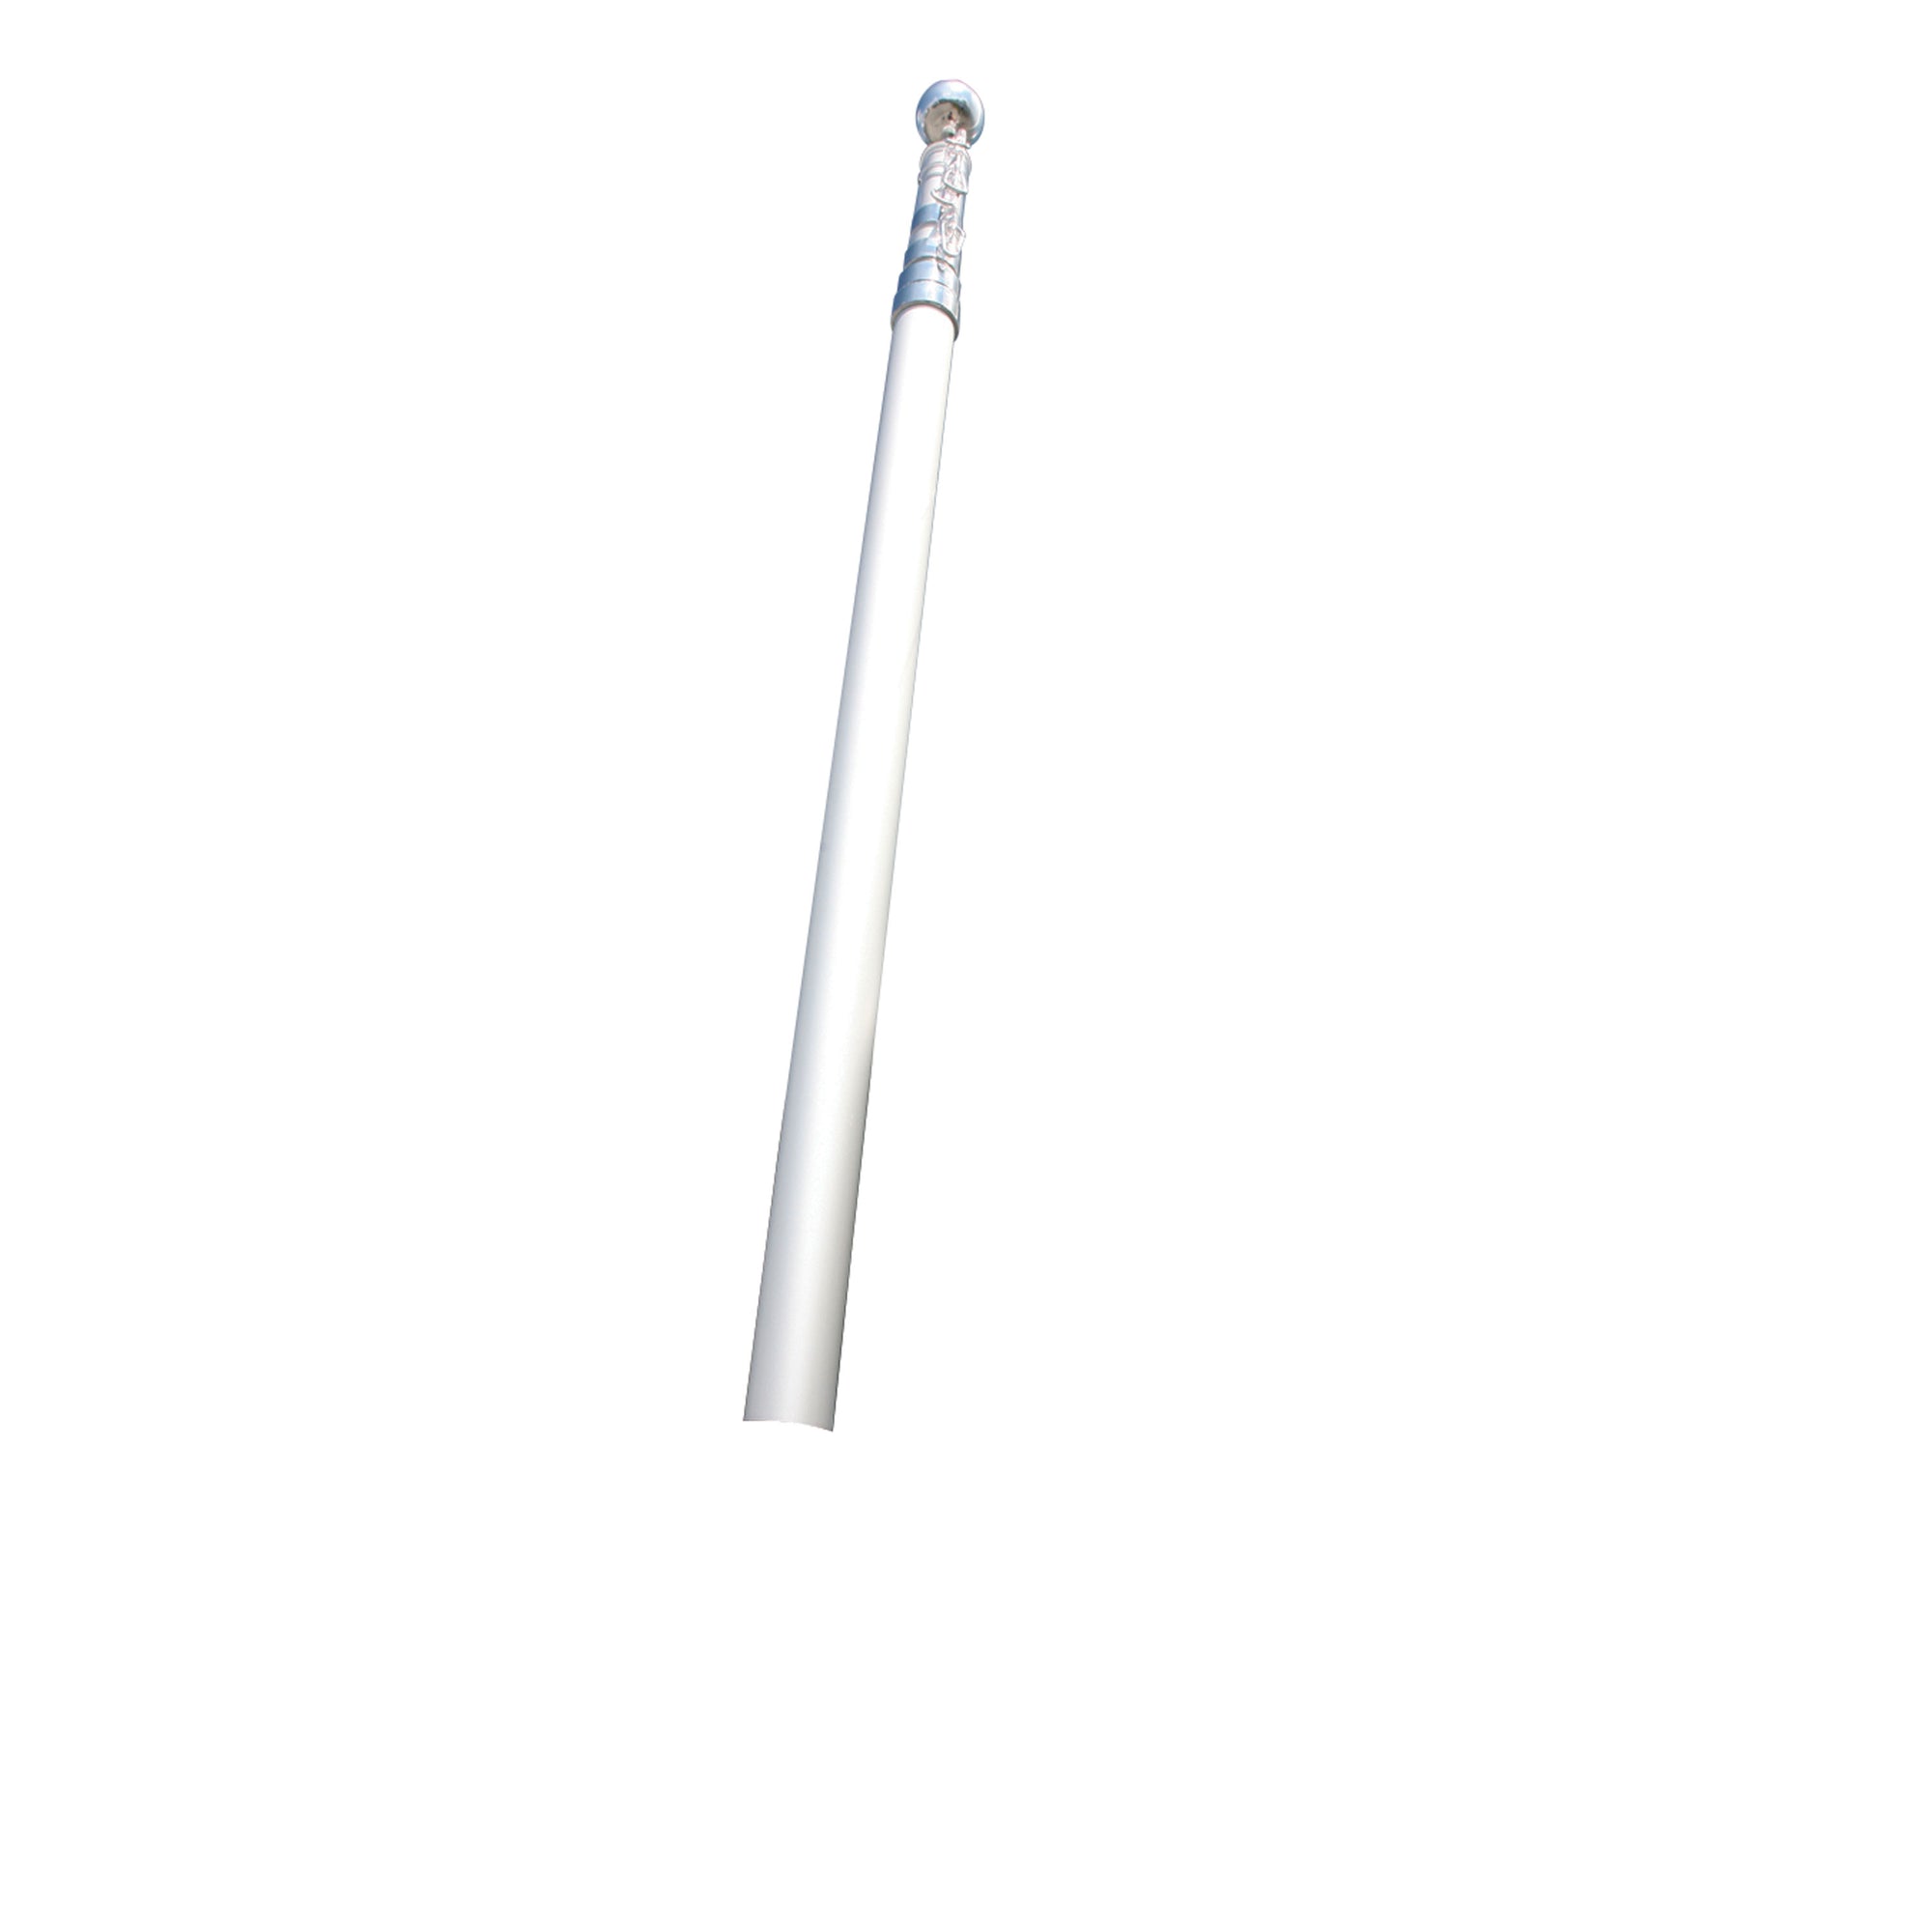 Camco 51600 20' Telescoping Flagpole With Car Foot